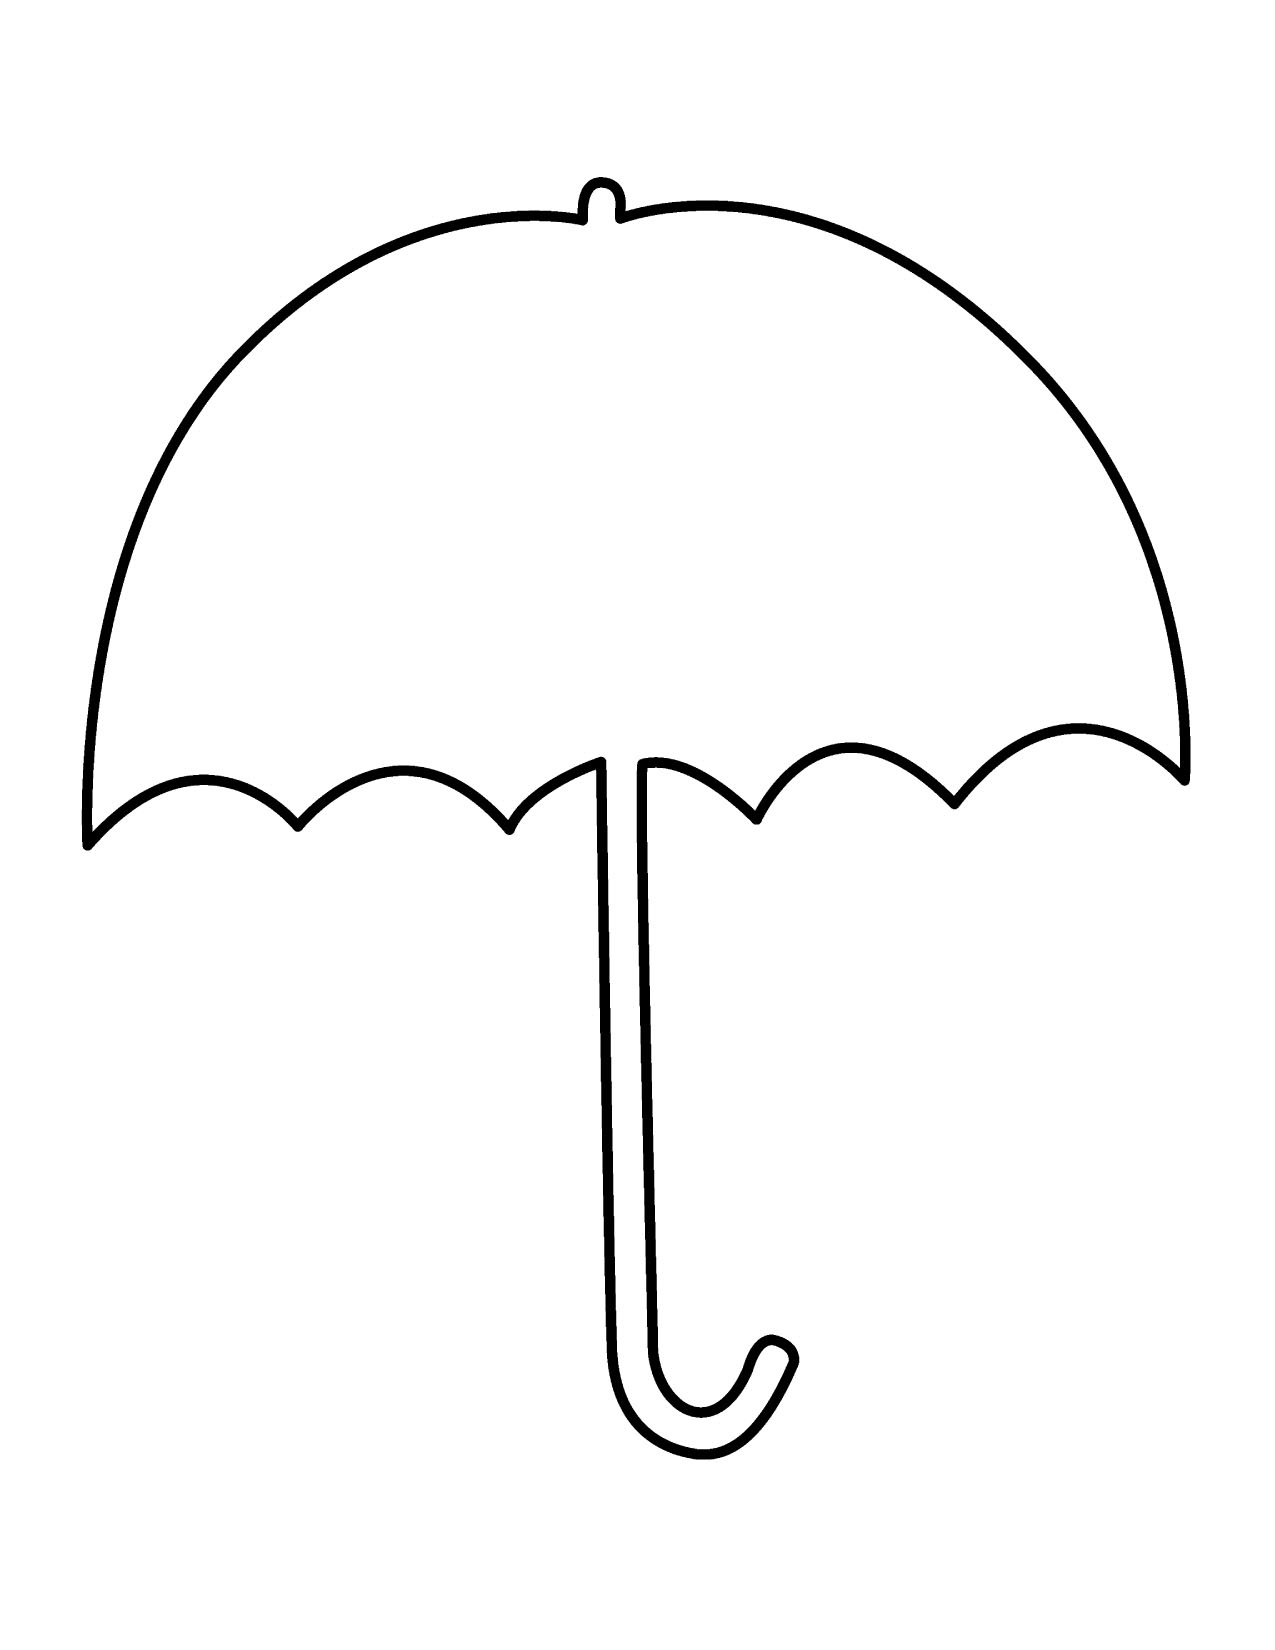 Closed Umbrella Outline Images  Pictures - Becuo